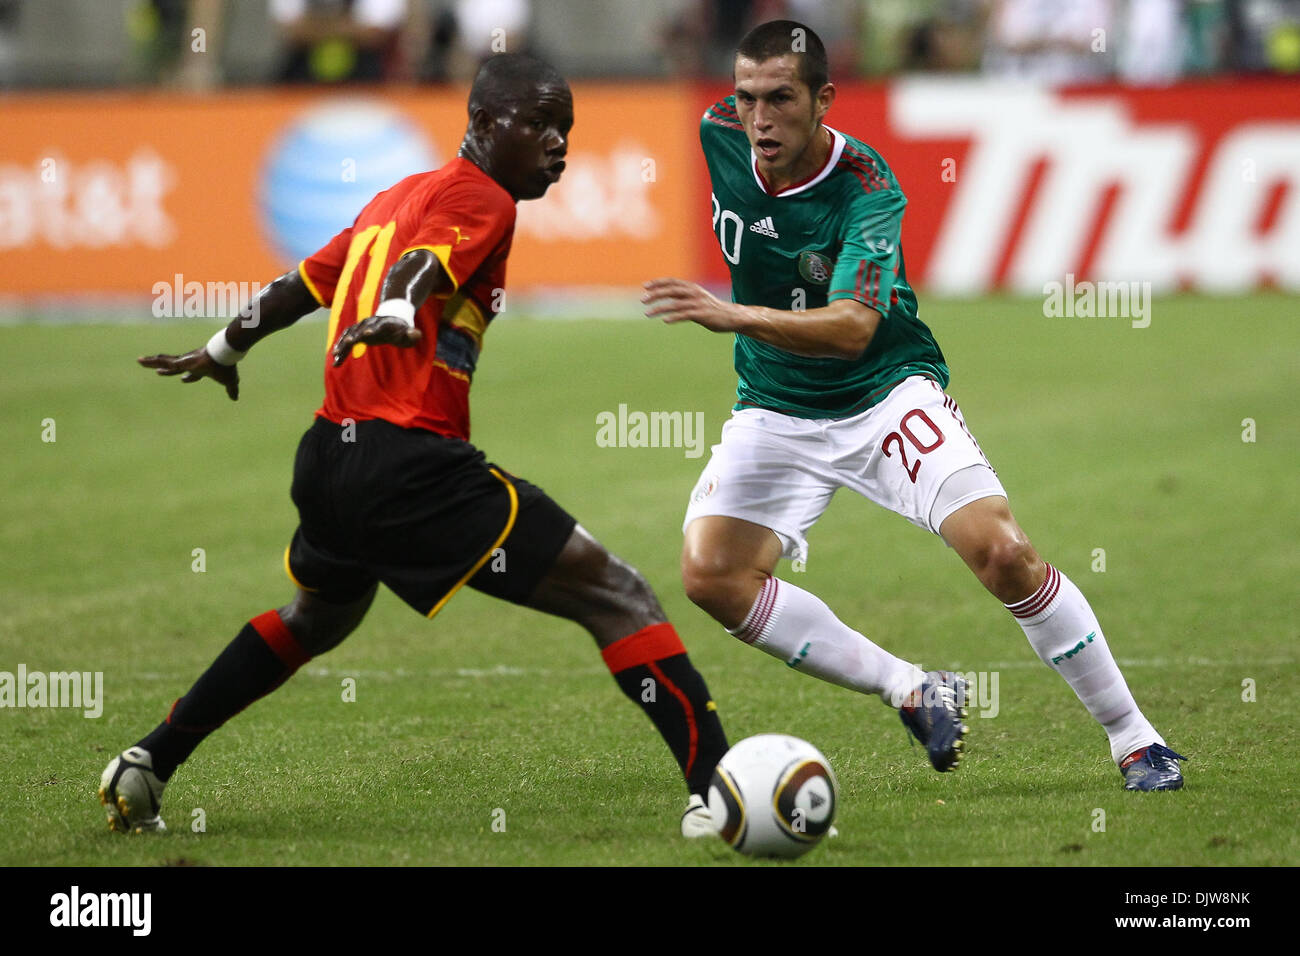 Jorge Torres Nilo (#20) Defender for Mexico passes the ball past Avex (#11) Midfielder for Angola at midfield.  Mexico defeated Angola 1-0 at Reliant Stadium in Houston, TX. (Credit Image: © Anthony Vasser/Southcreek Global/ZUMApress.com) Stock Photo